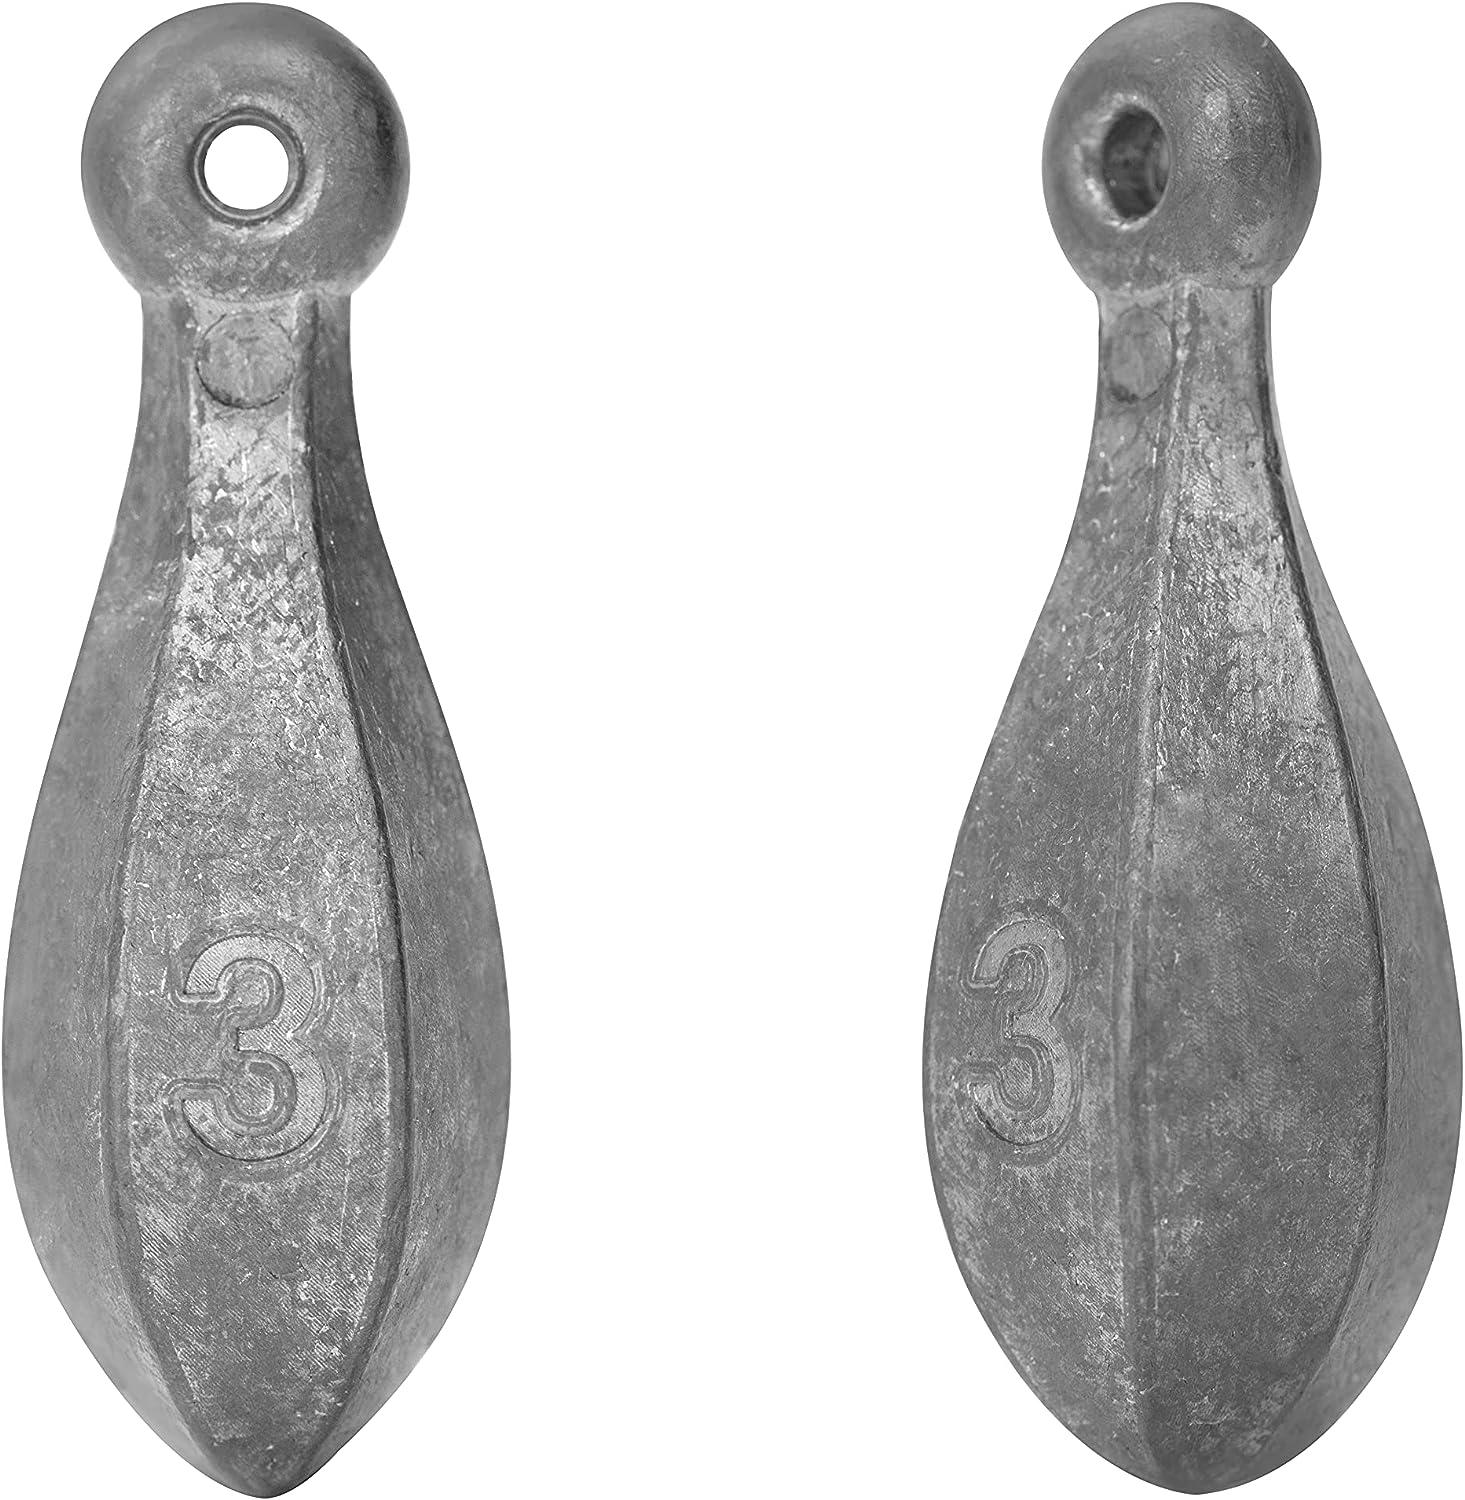 Fishing Sinkers for Strong Current